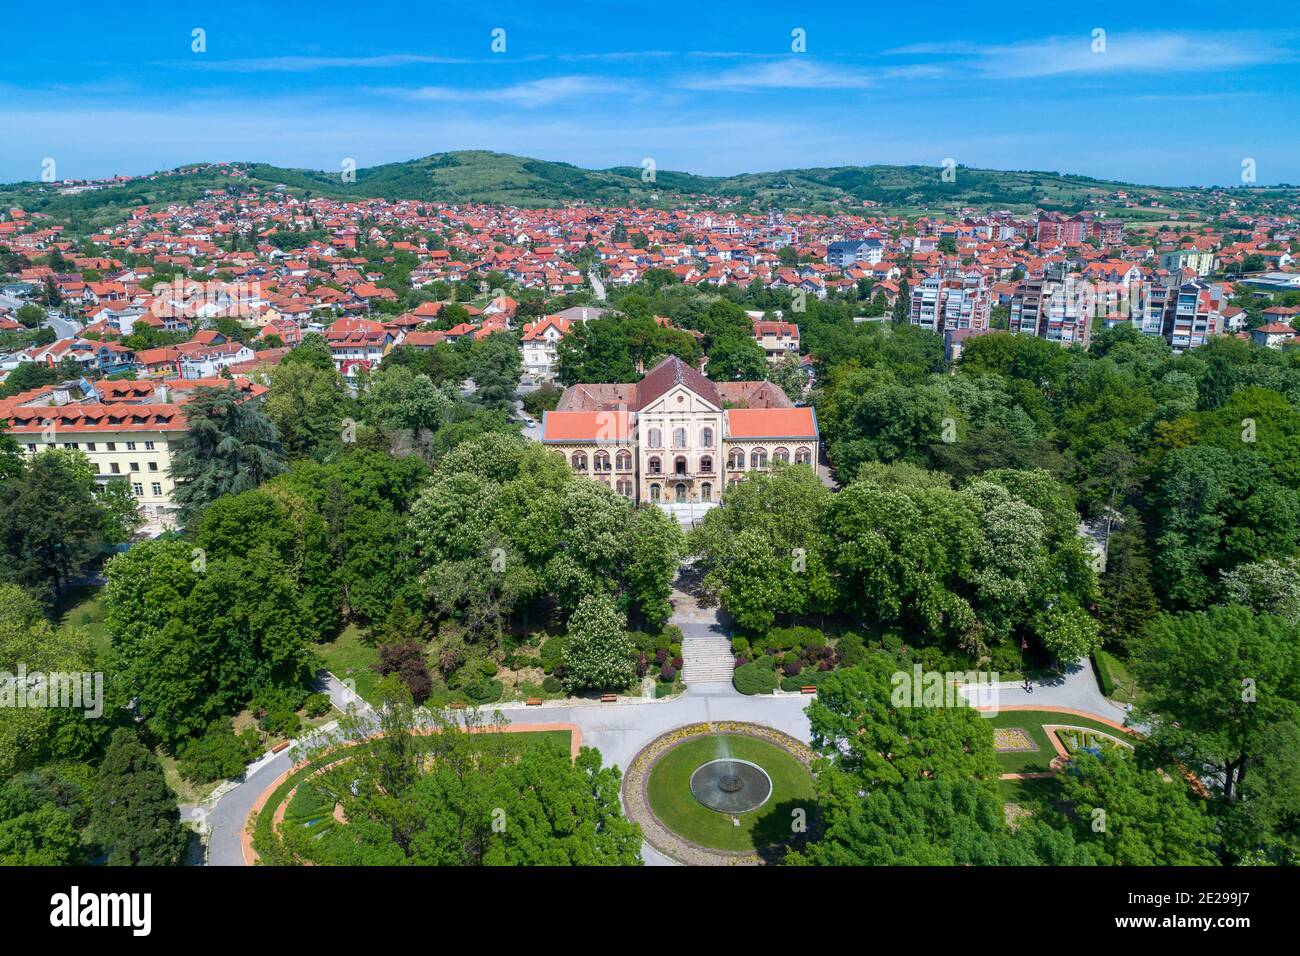 Aerial view of Arandjelovac, Park and castle in City in Sumadija, Central Serbia Stock Photo